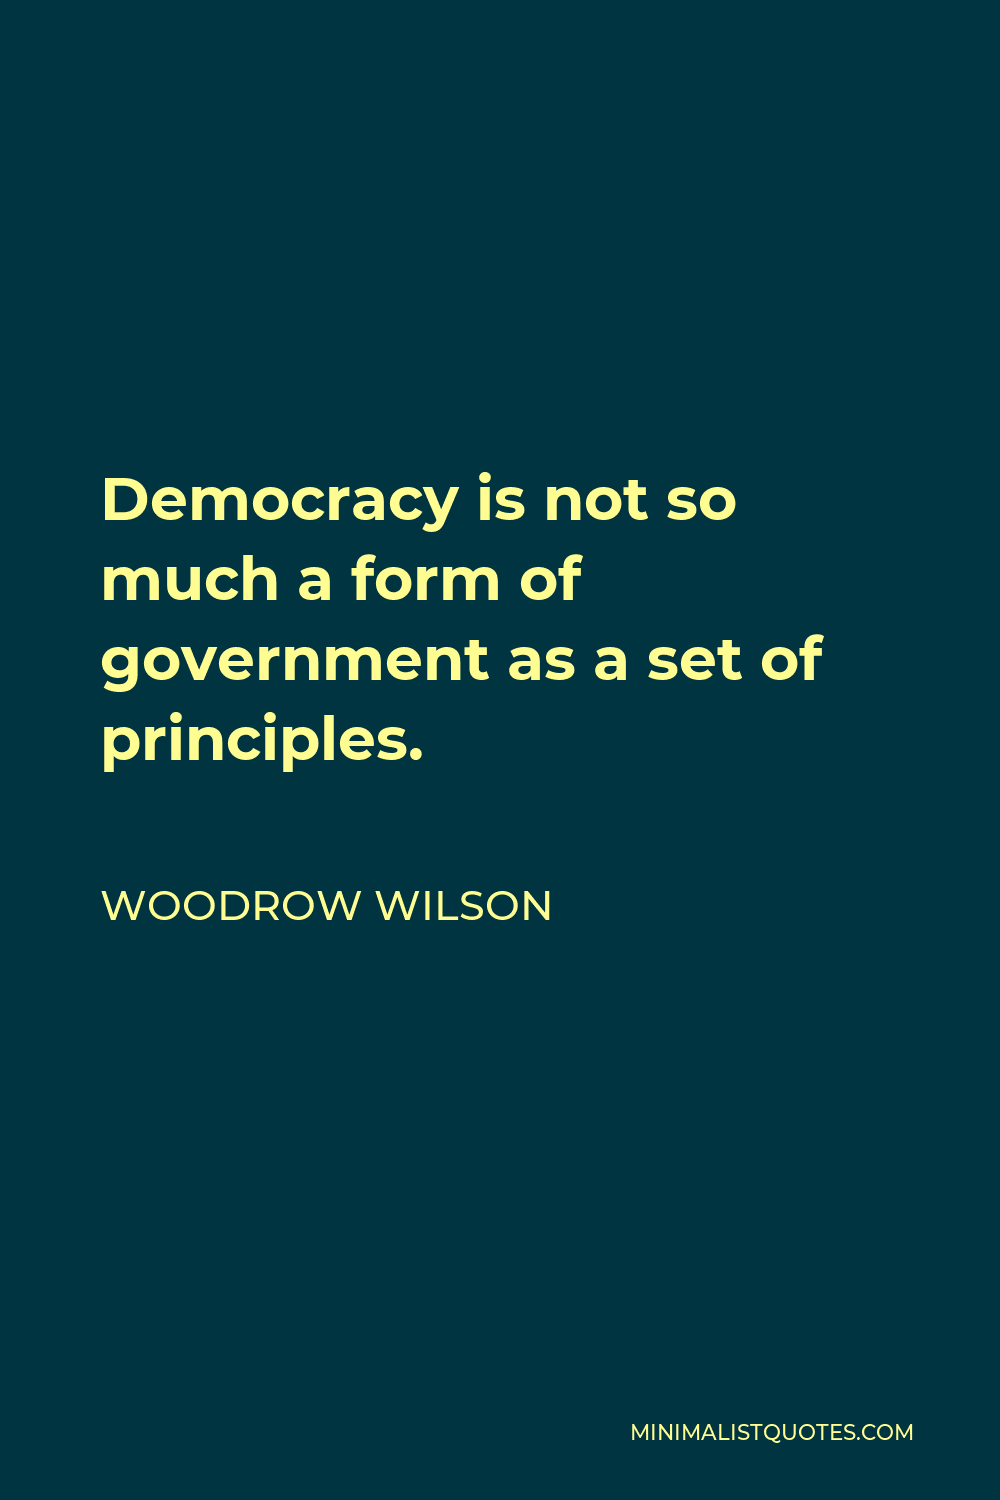 Woodrow Wilson Quote - Democracy is not so much a form of government as a set of principles.